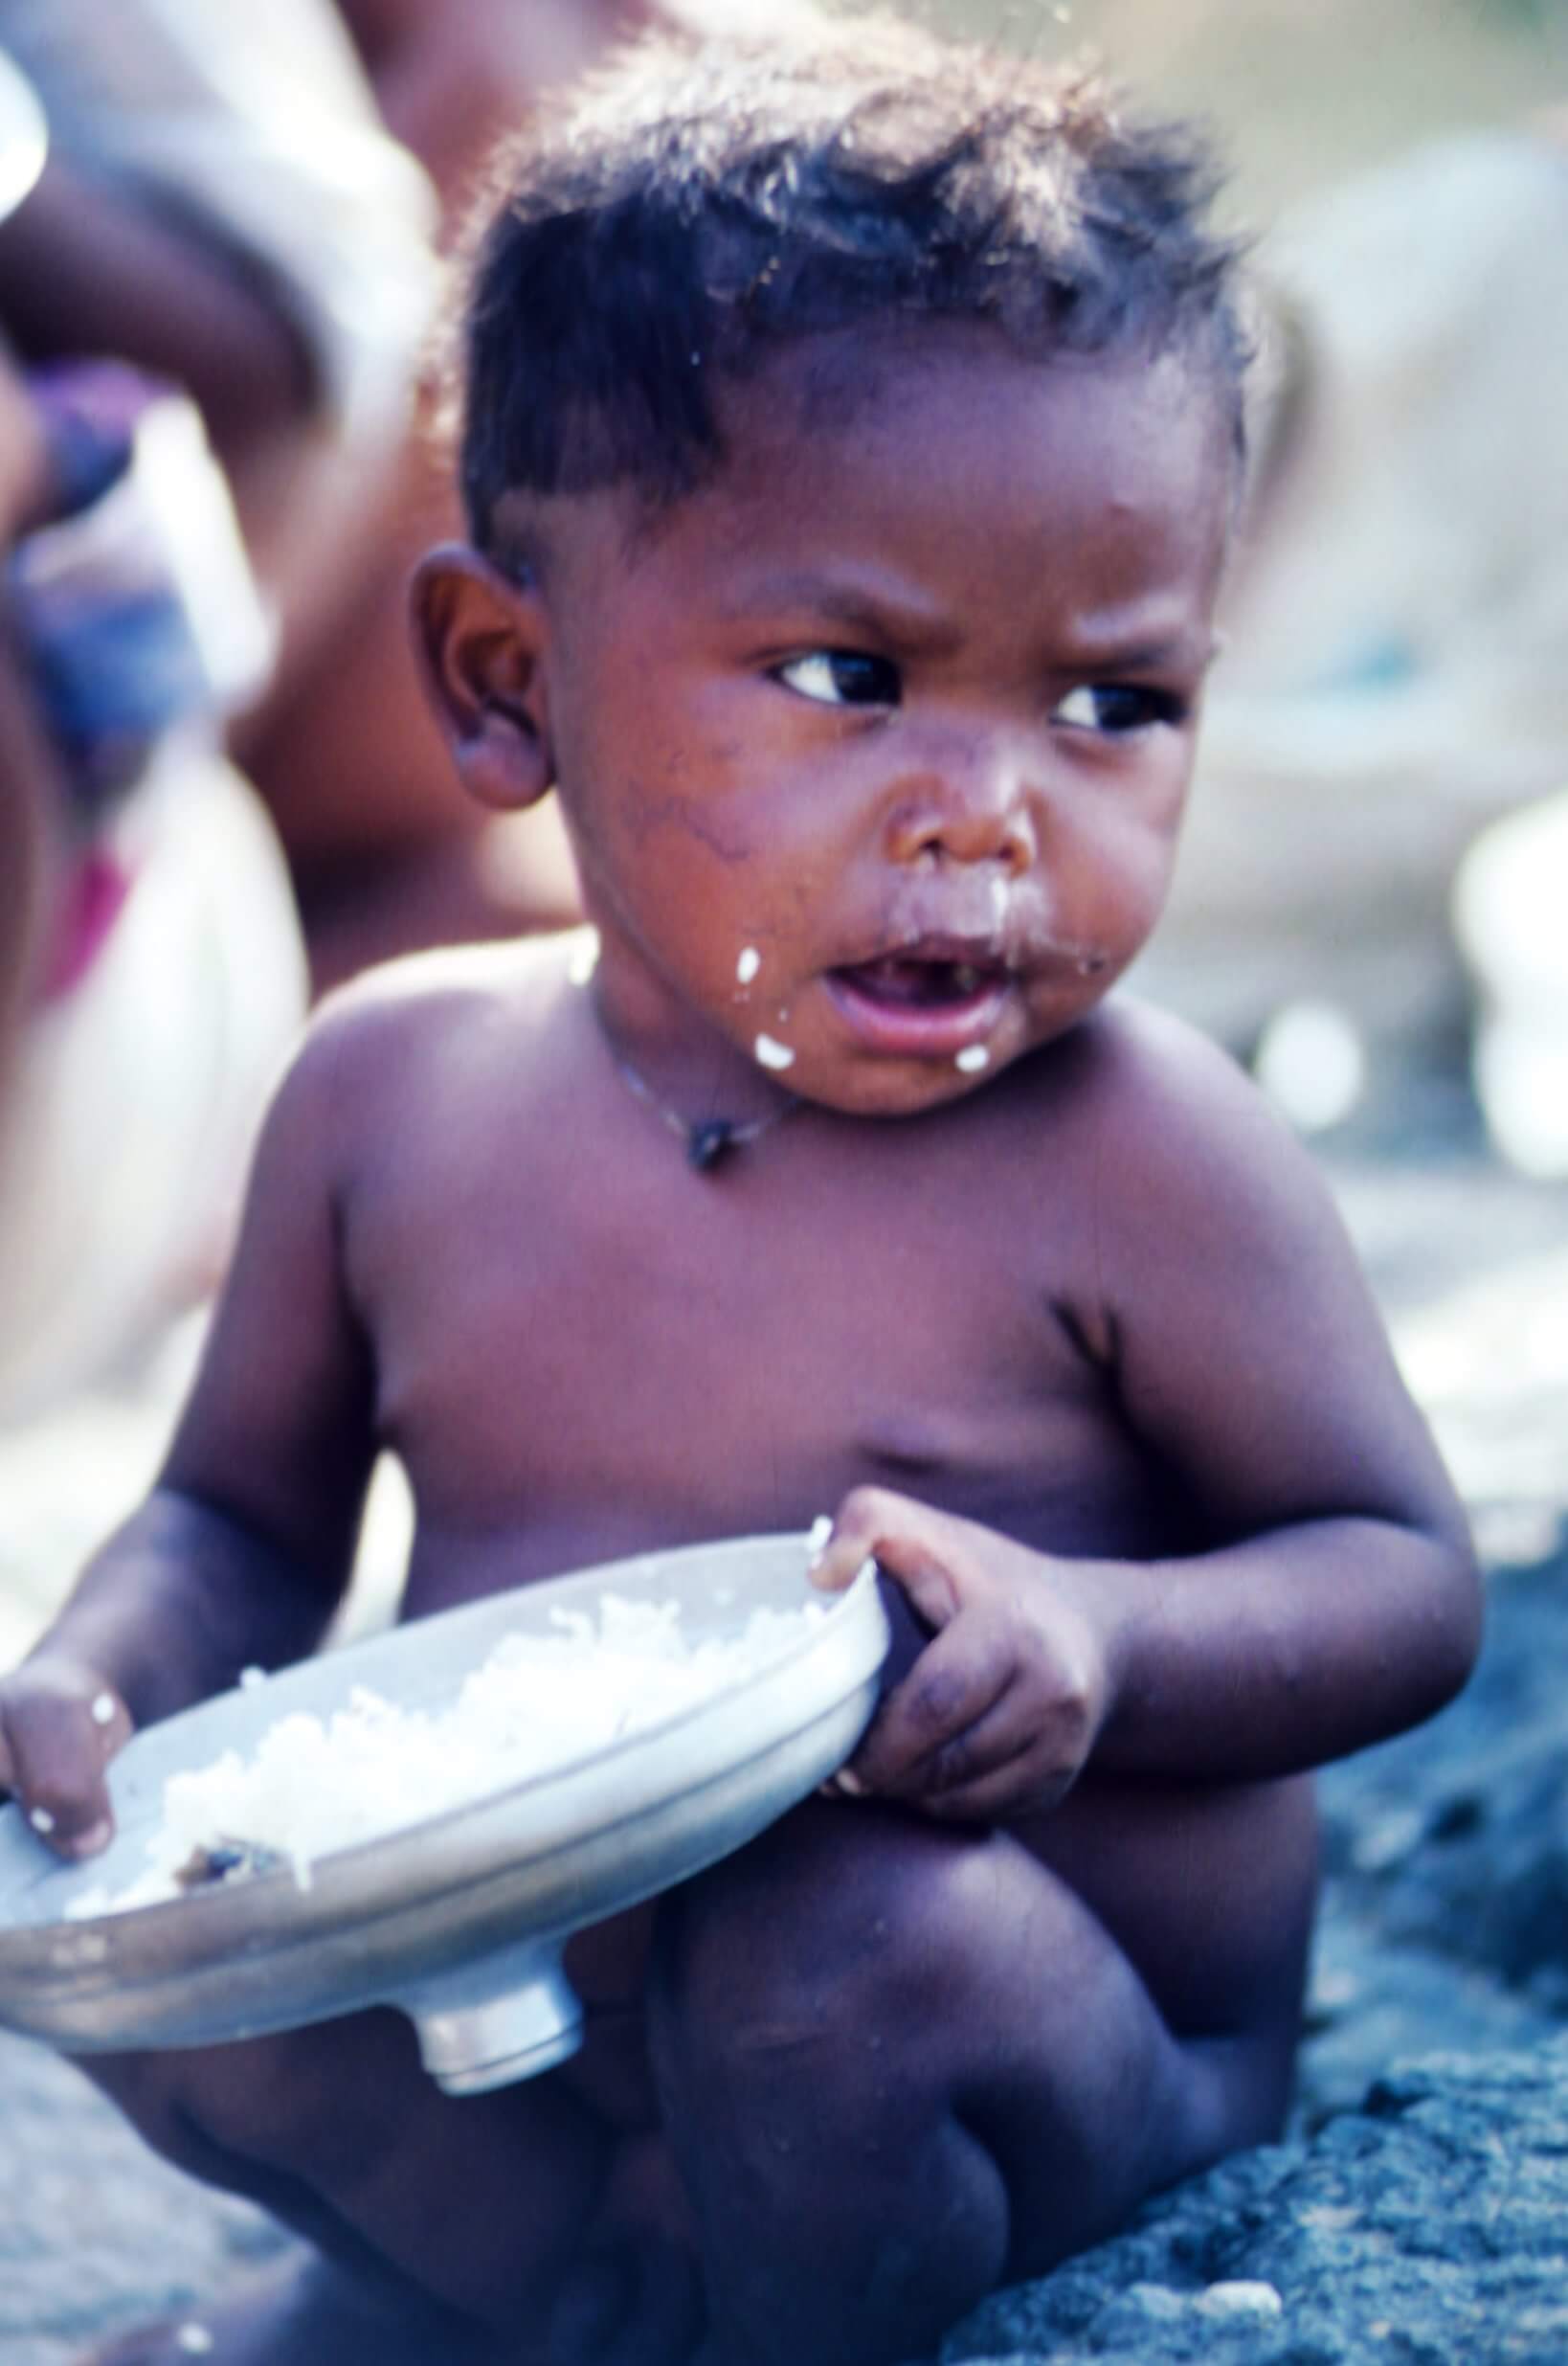 IPs victim of the ban against ‘kaingin’. This child is forced to eat small quantities of purchased rice since his tribe can no longer plant it. 